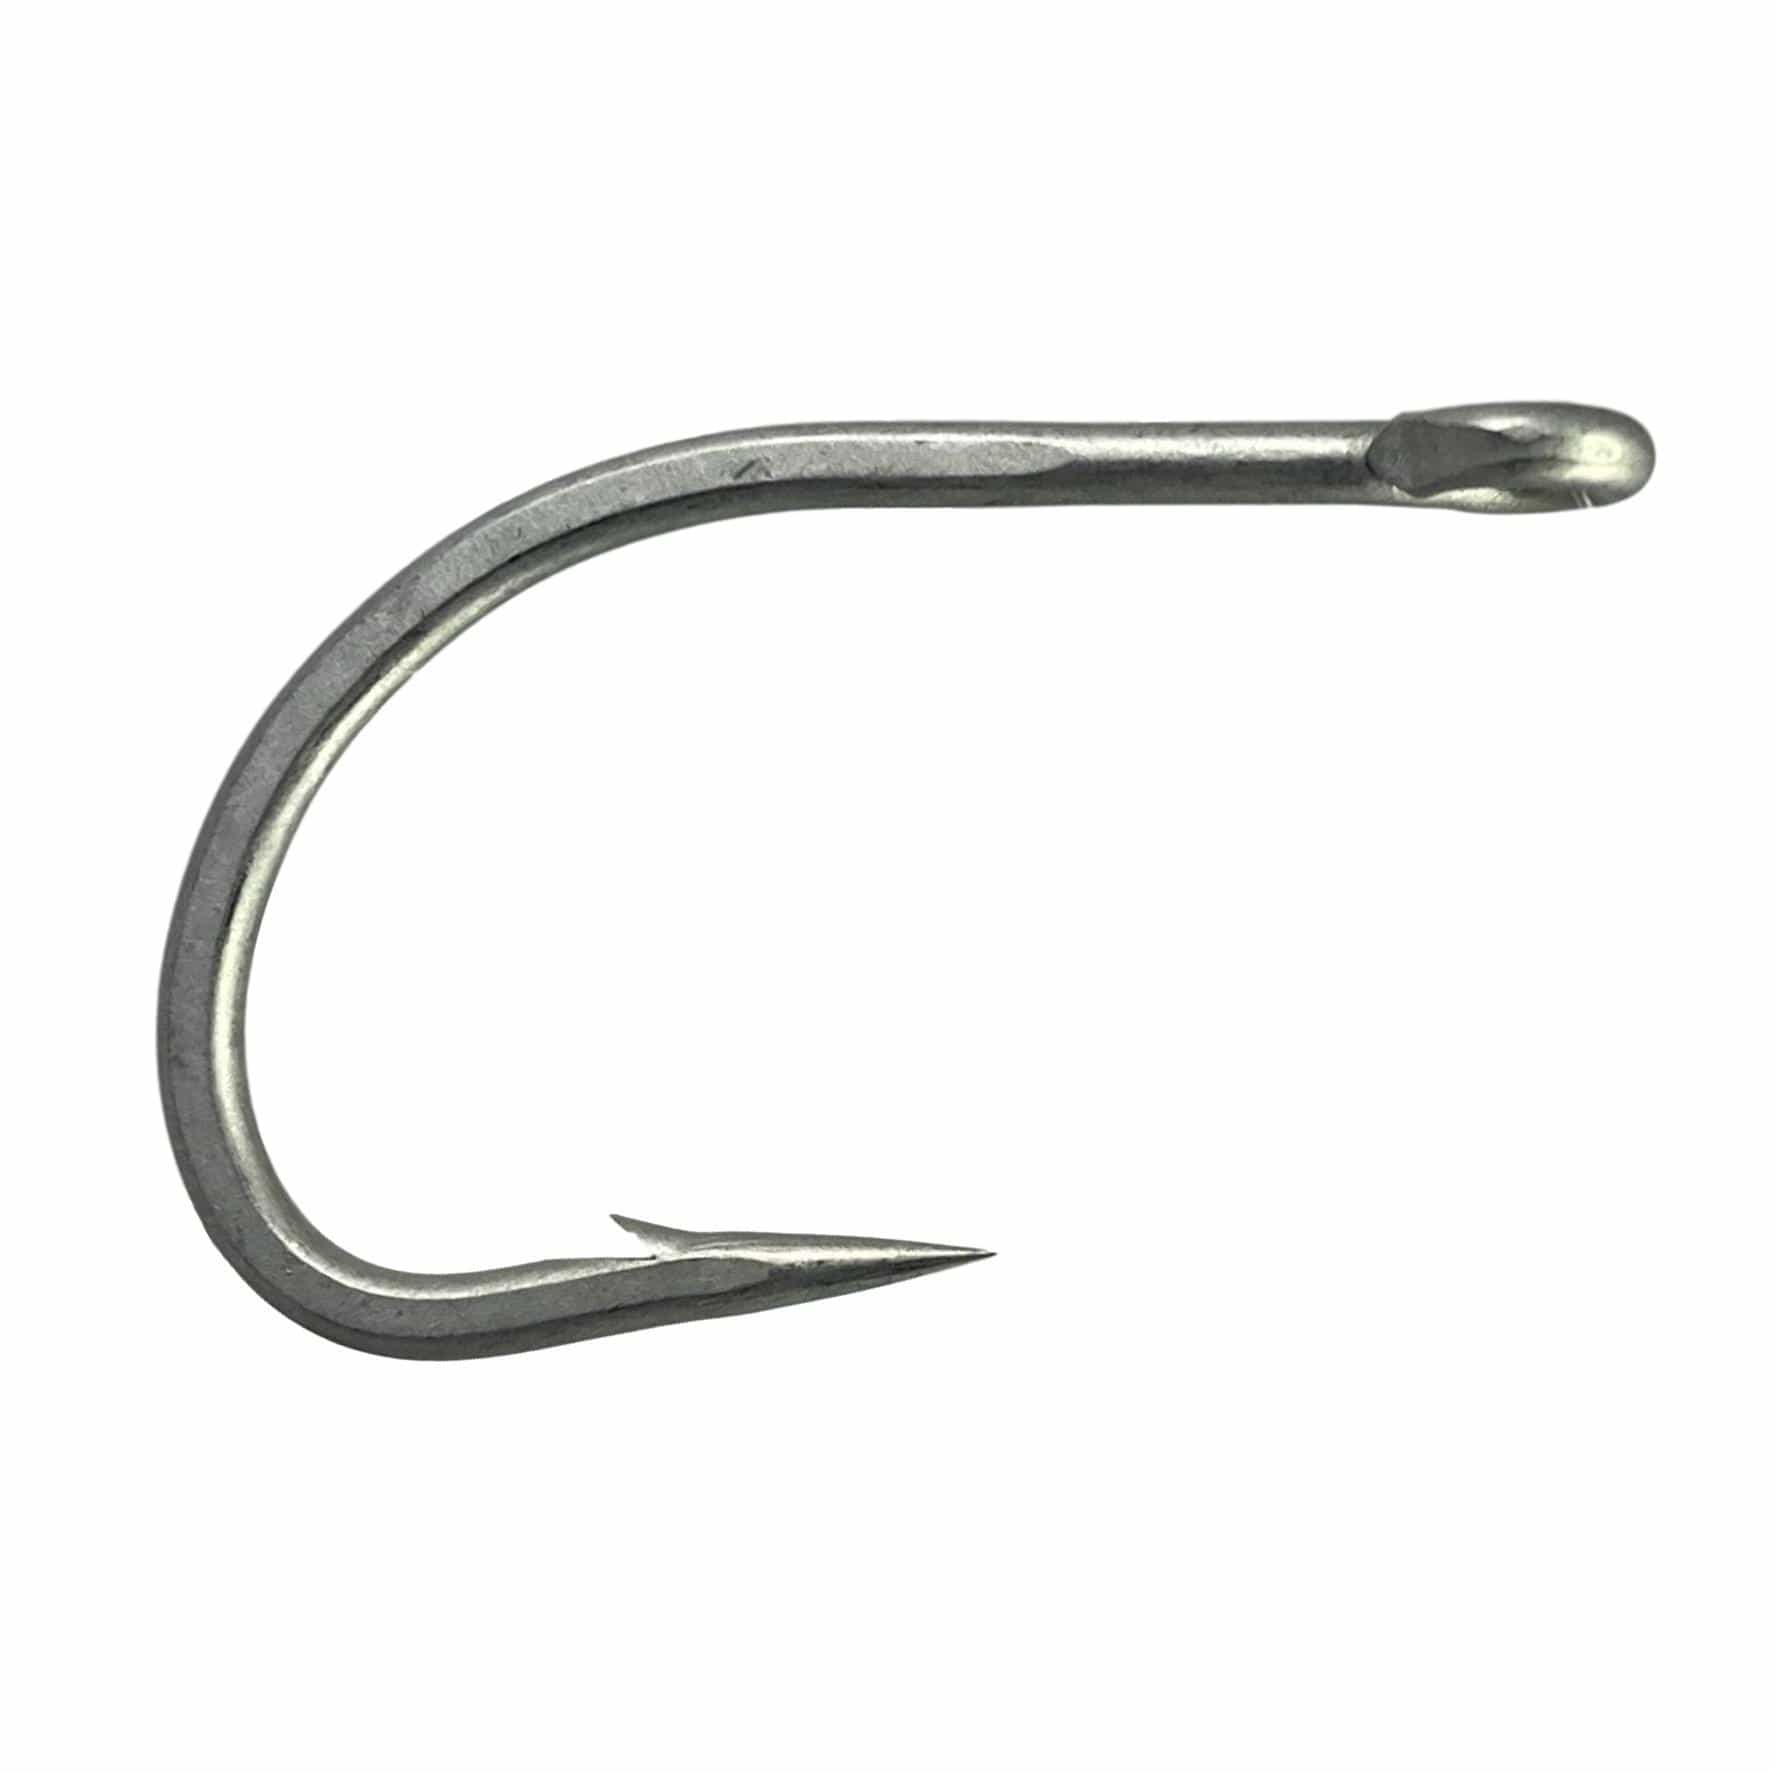 VMC 7265PS O'Shaughnessy Live Bait Hook (10 Per Pack)